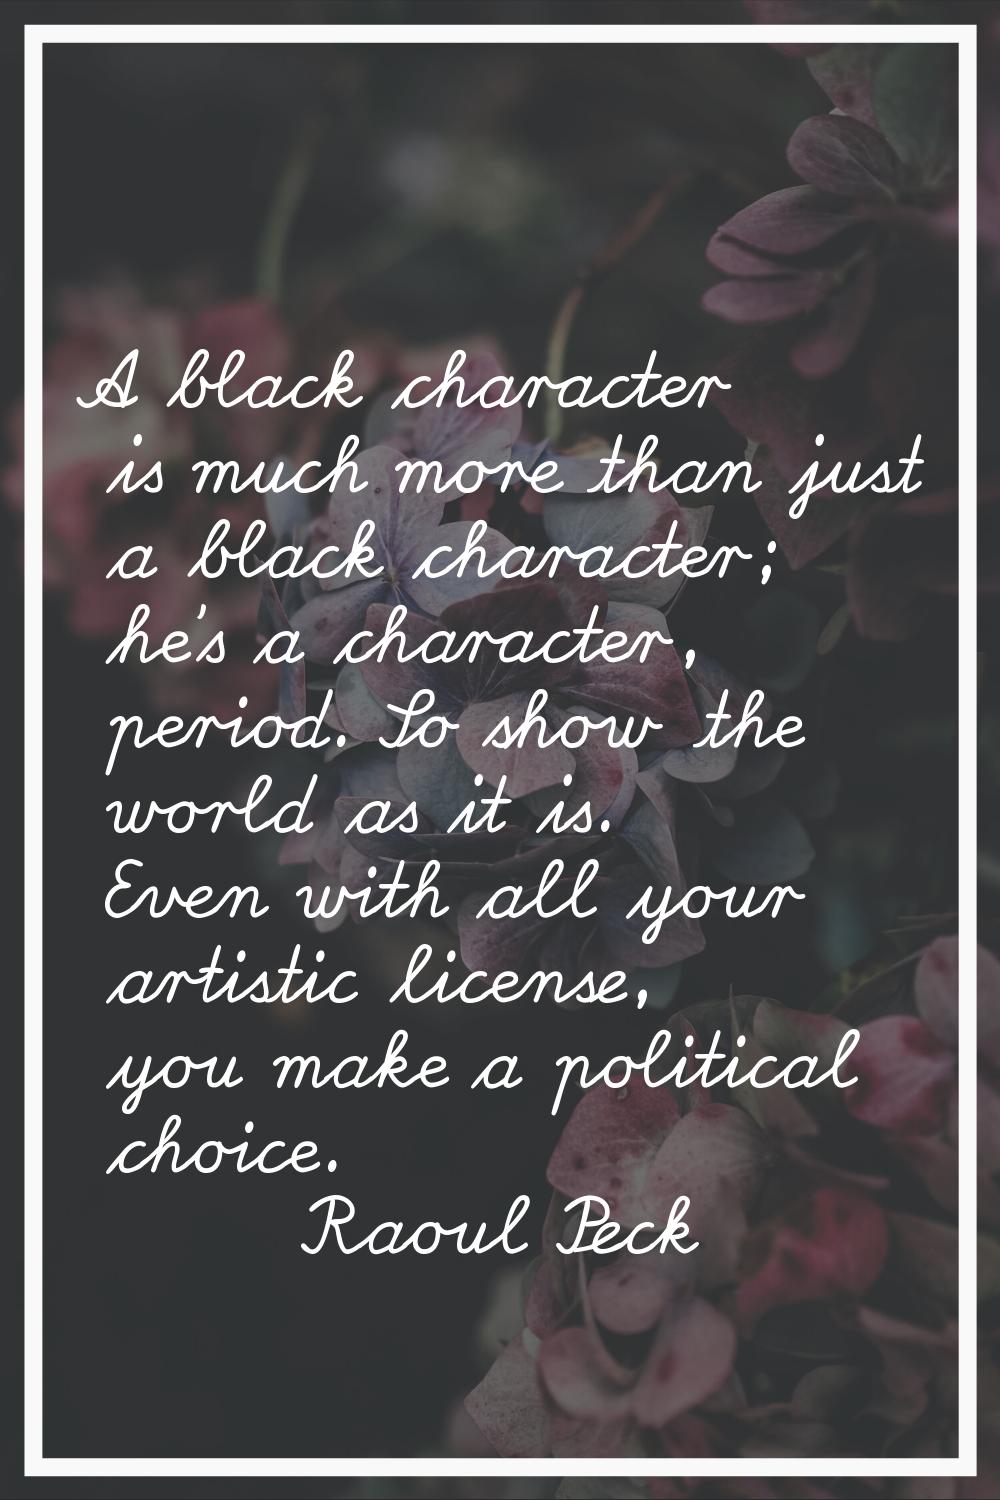 A black character is much more than just a black character; he's a character, period. So show the w